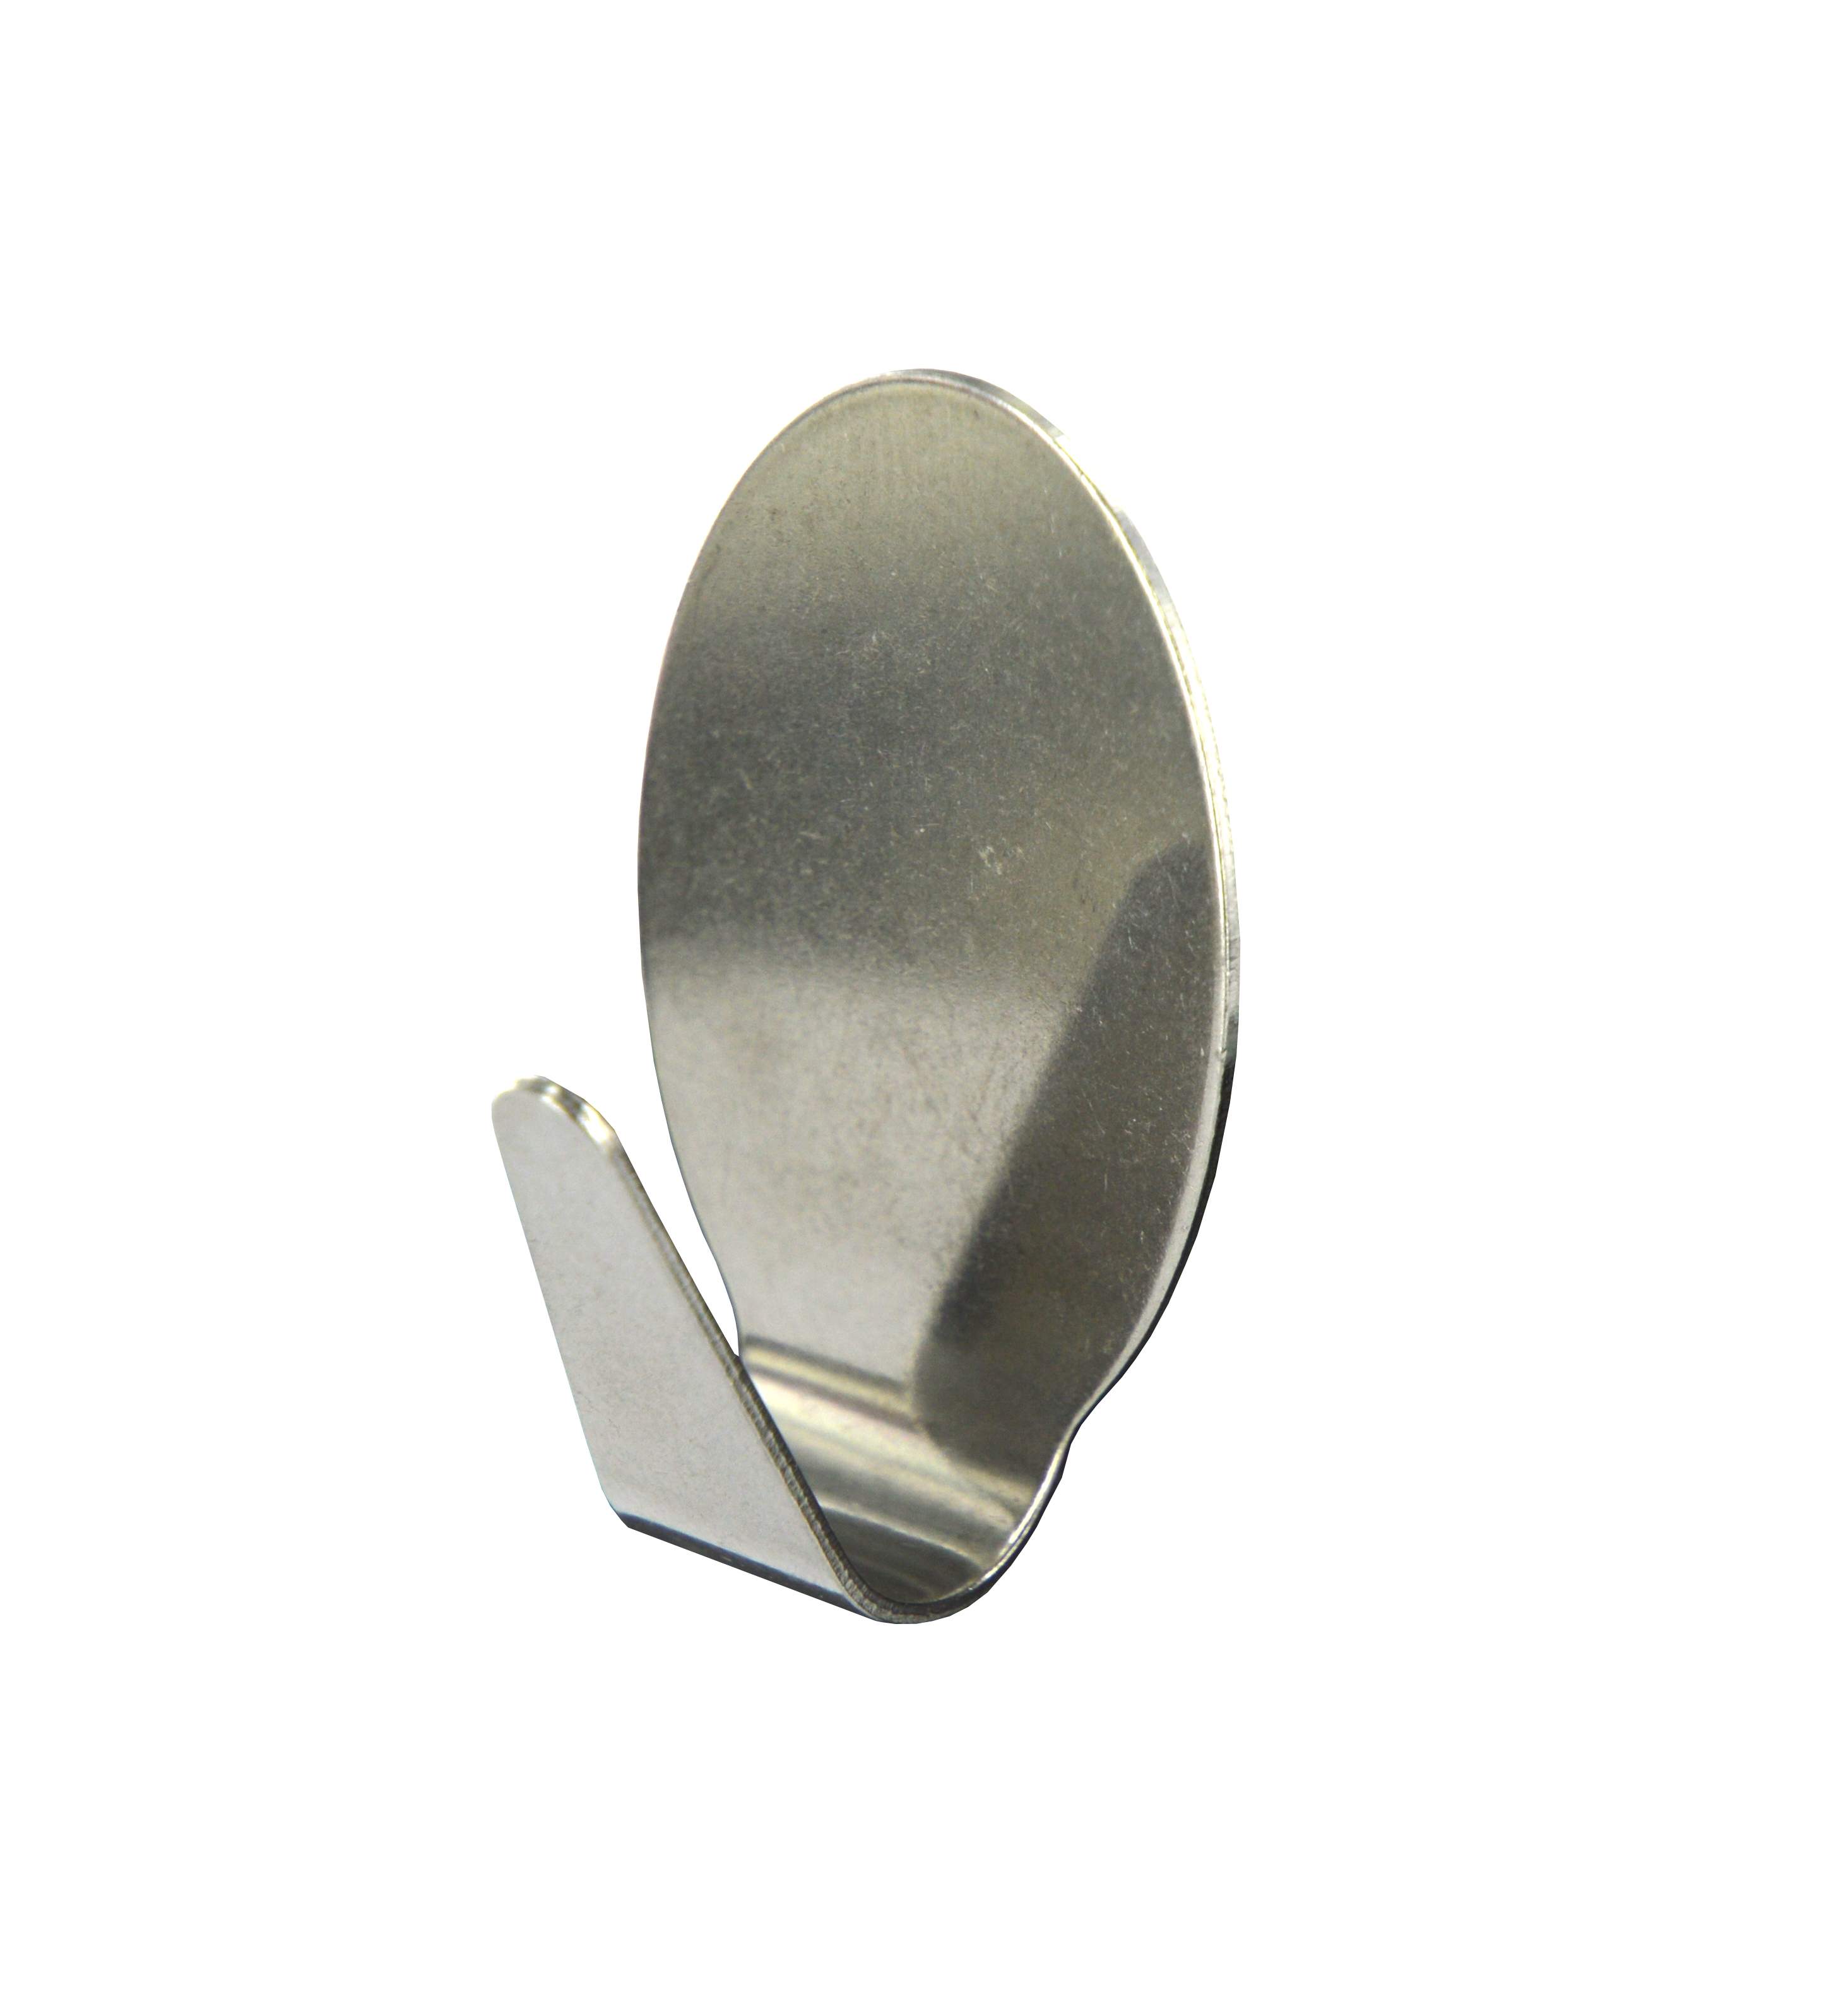 Adhesive oval deco hook H.40mm, W.27mm, stainless steel, 1 pc.